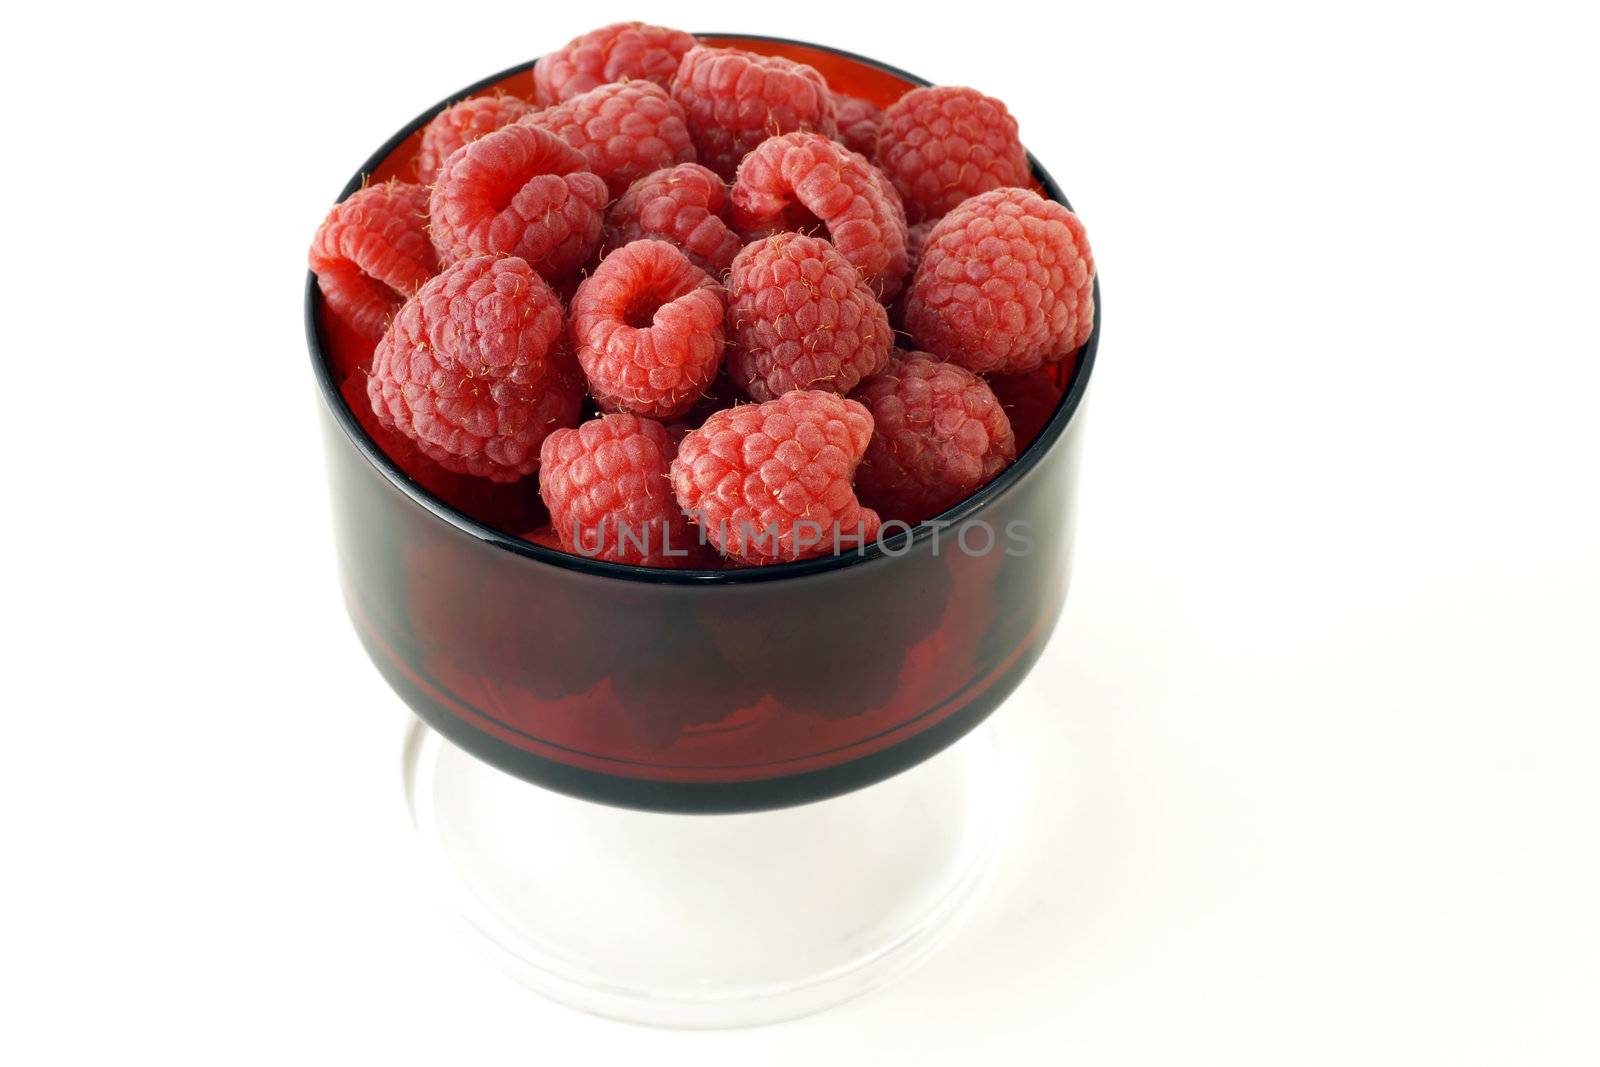 Glass filled with raspberries by Mirage3